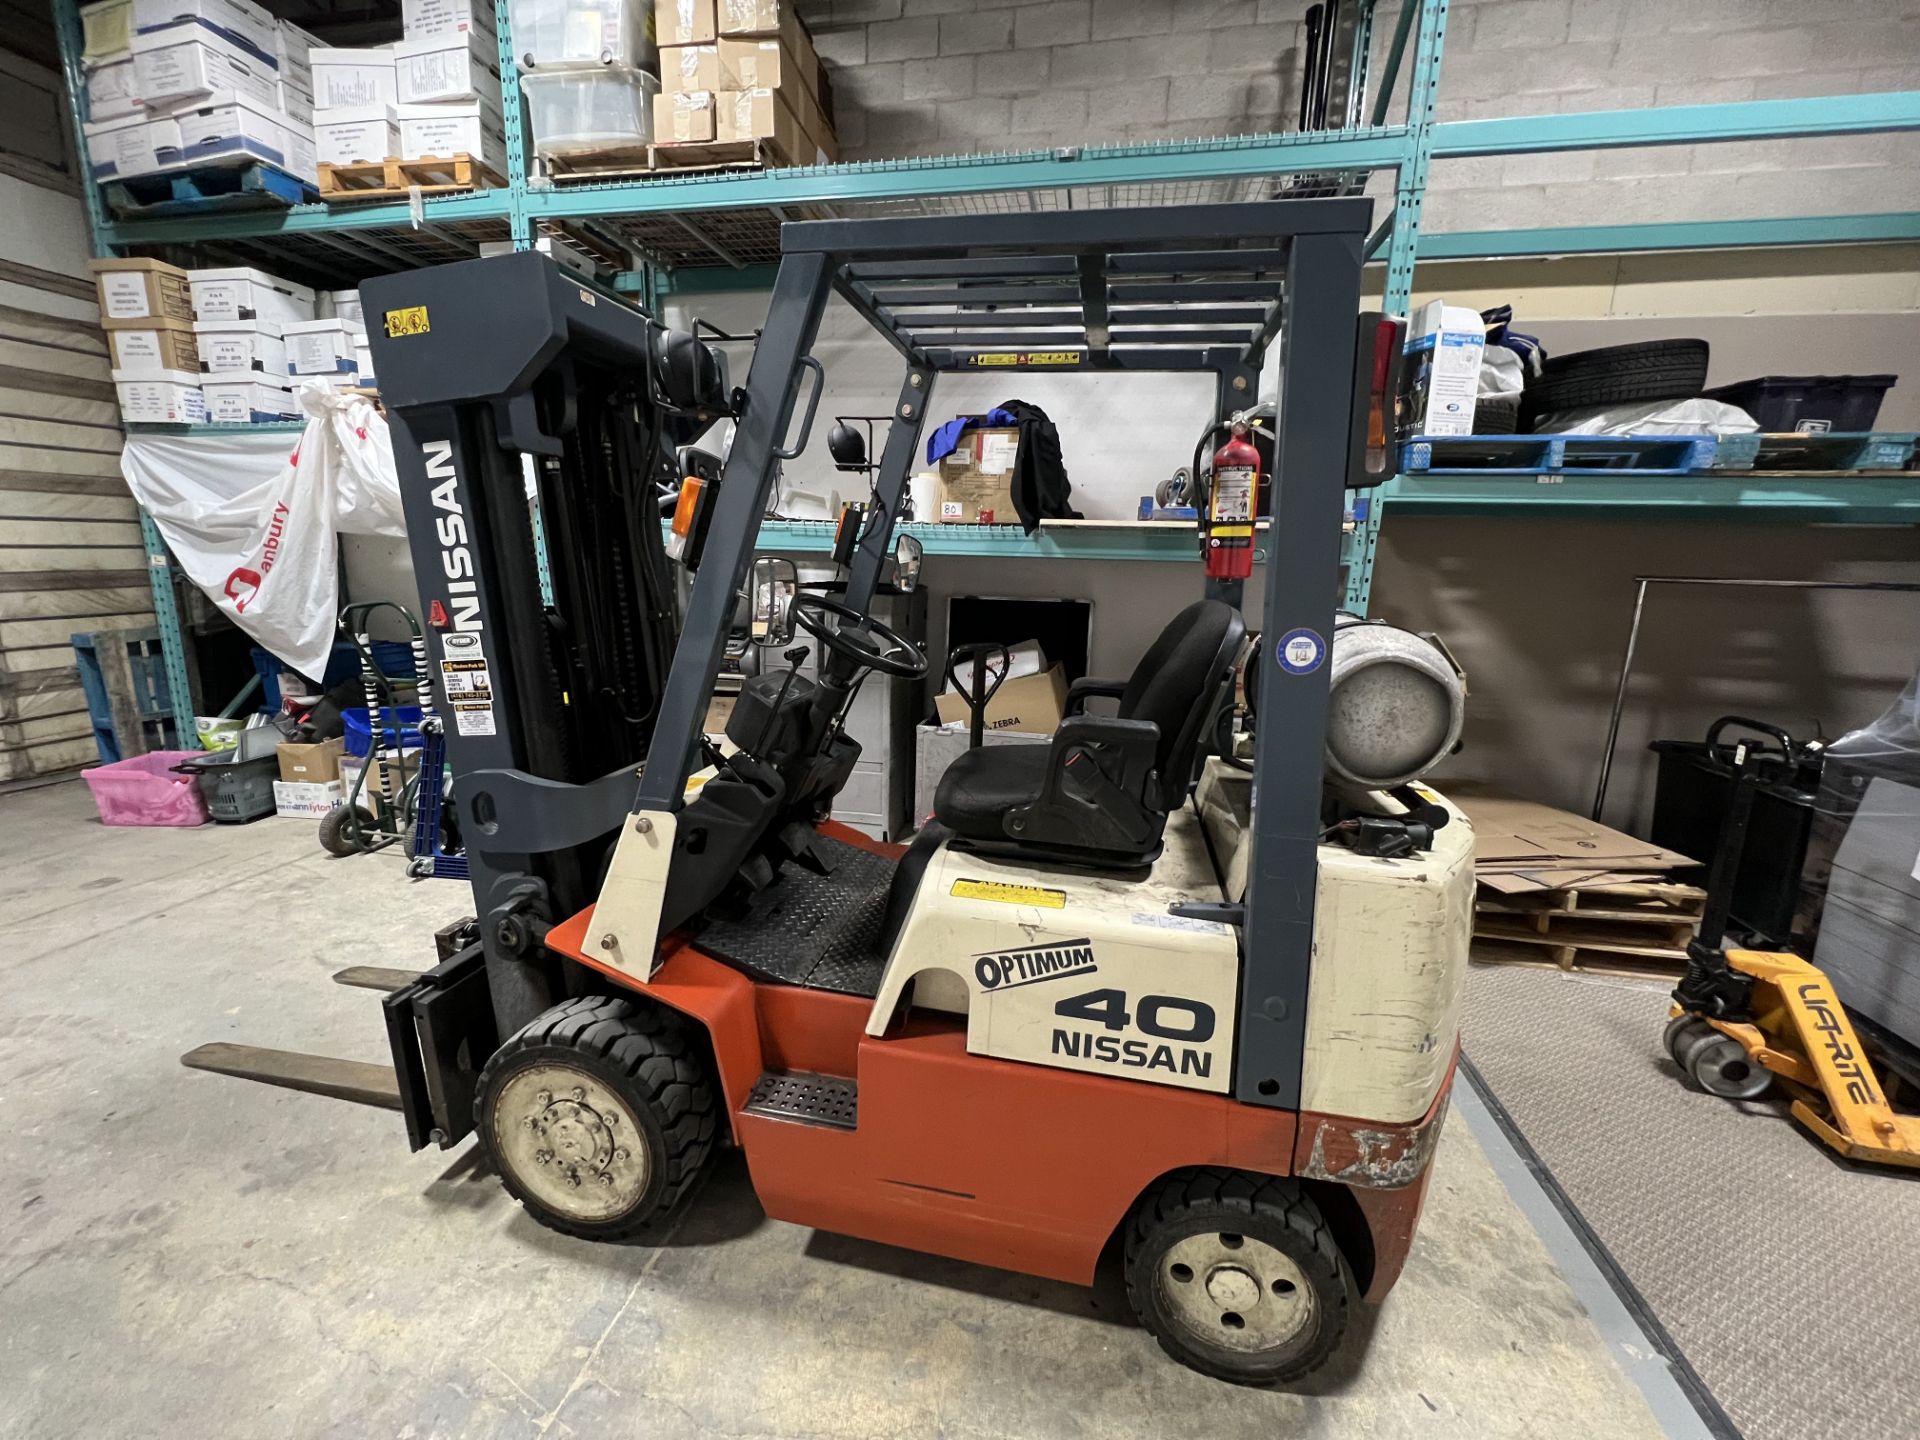 NISSAN CFJ02A20PV 5,000LBS CAP PROPANE POWERED FORKLIFT W/ 240" MAX LIFT, 4-STAGE MAST, SIDE